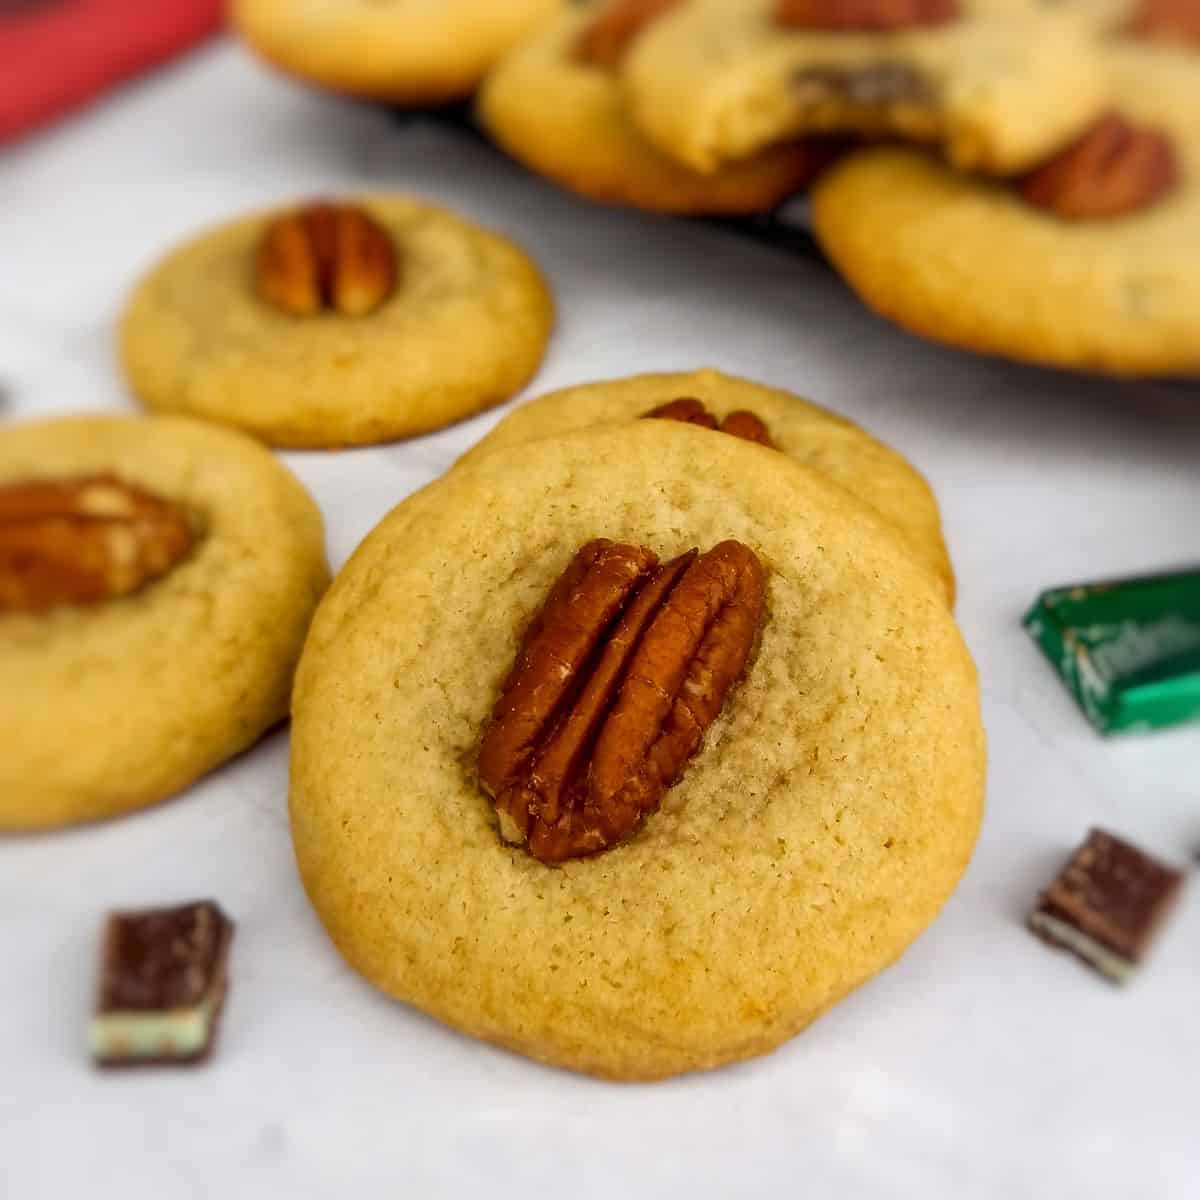 Amish mint surprise cookies topped with pecans.